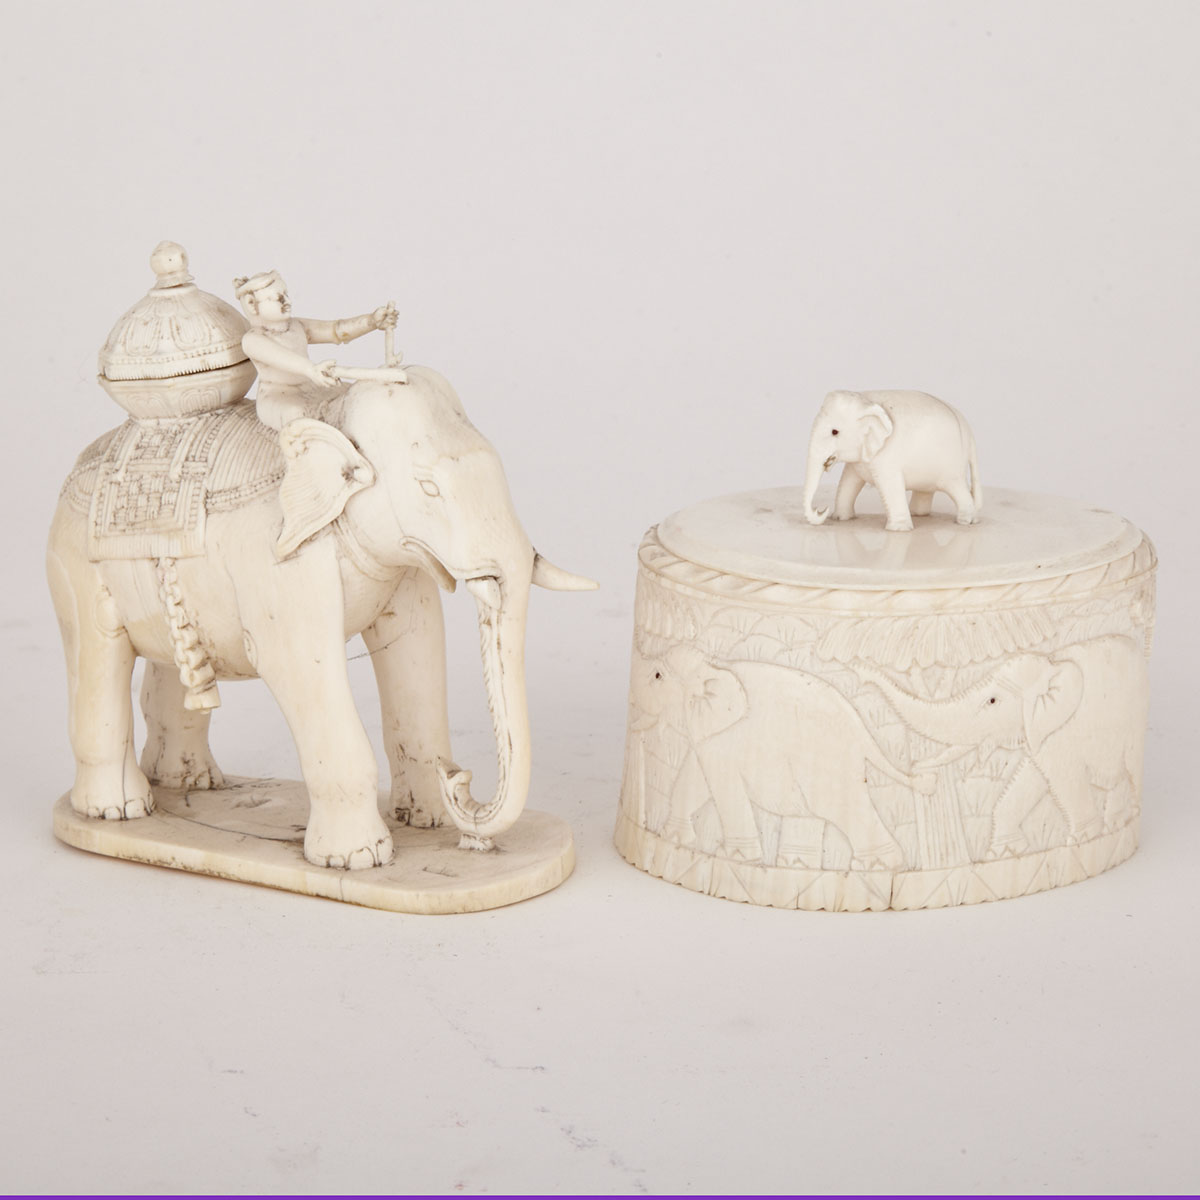 Ivory Carved Elephant and Rider, India, First-Half 20th Century